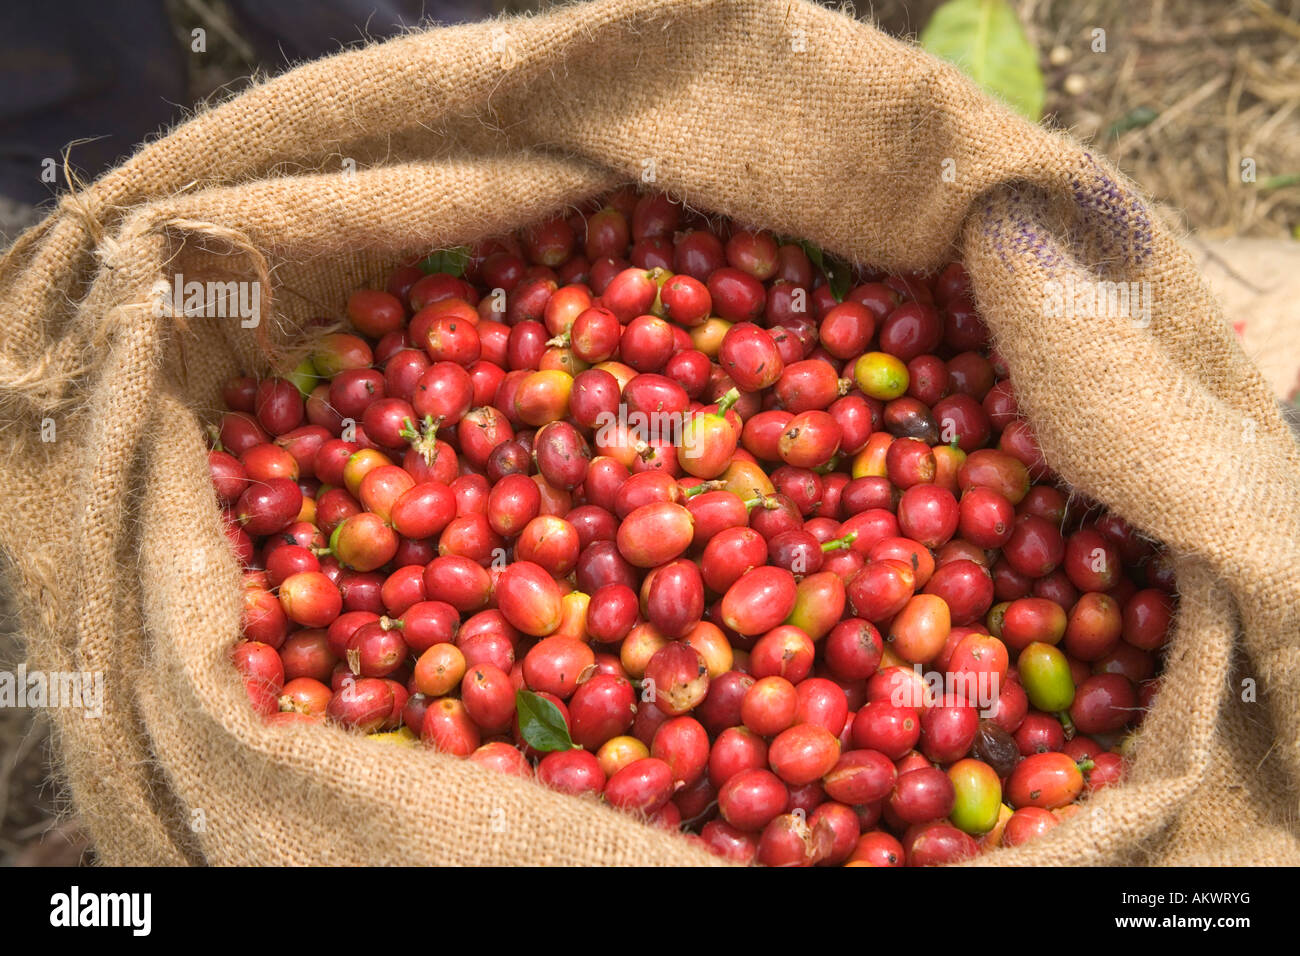 Harvested colorful Kona coffee beans in burlap sack. Stock Photo